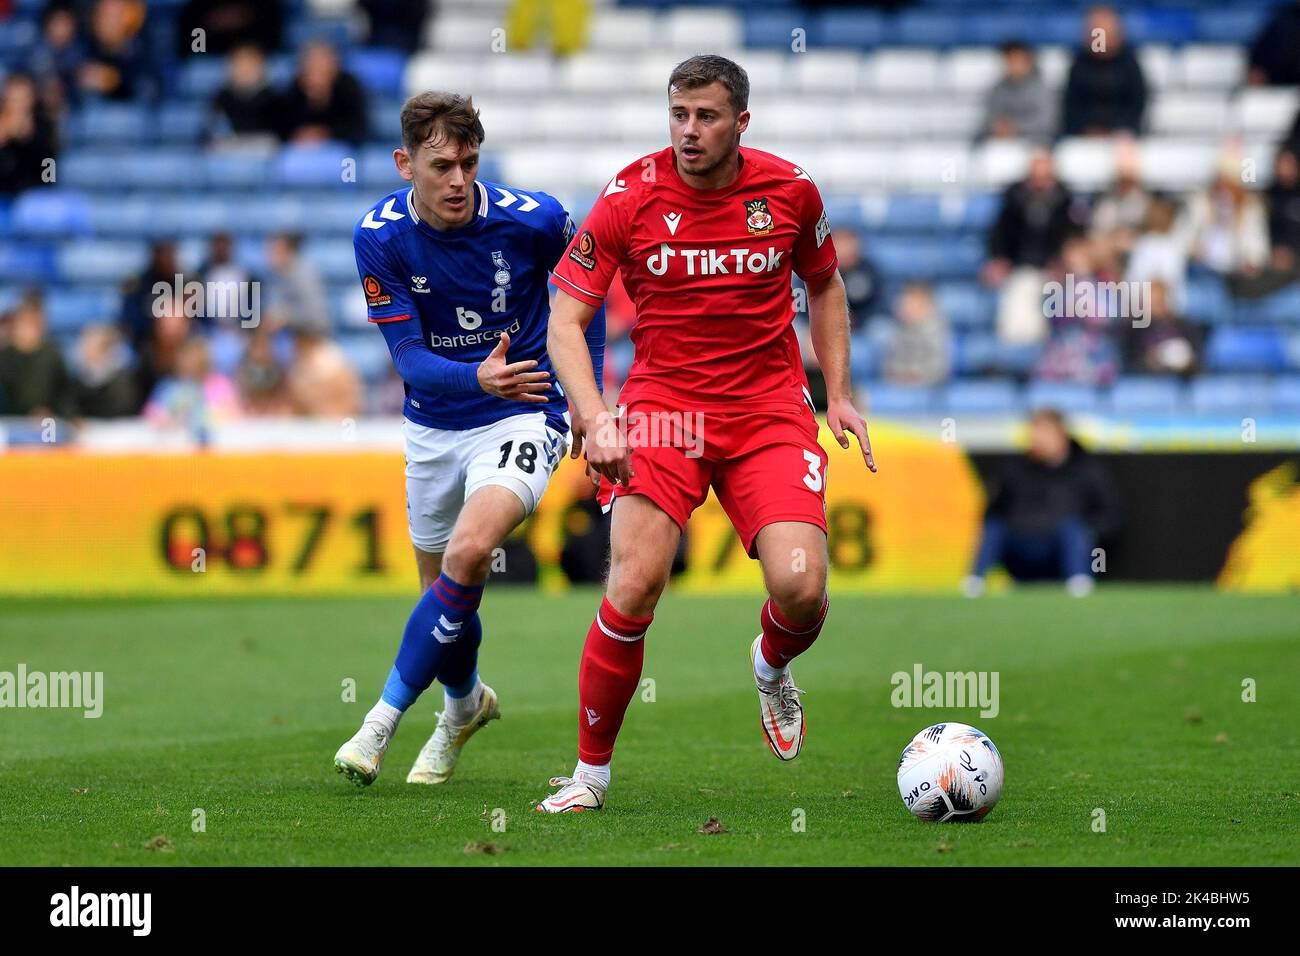 Oldham, UK. 1st October 2022during the Vanarama National League match between Oldham Athletic and Wrexham at Boundary Park, Oldham on Saturday 1st October 2022Ben Tollitt of Oldham Athletic tussles with James Jones of Wrexham Football Club during the Vanarama National League match between Oldham Athletic and Wrexham at Boundary Park, Oldham on Saturday 1st October 2022. Credit: MI News & Sport /Alamy Live News Stock Photo